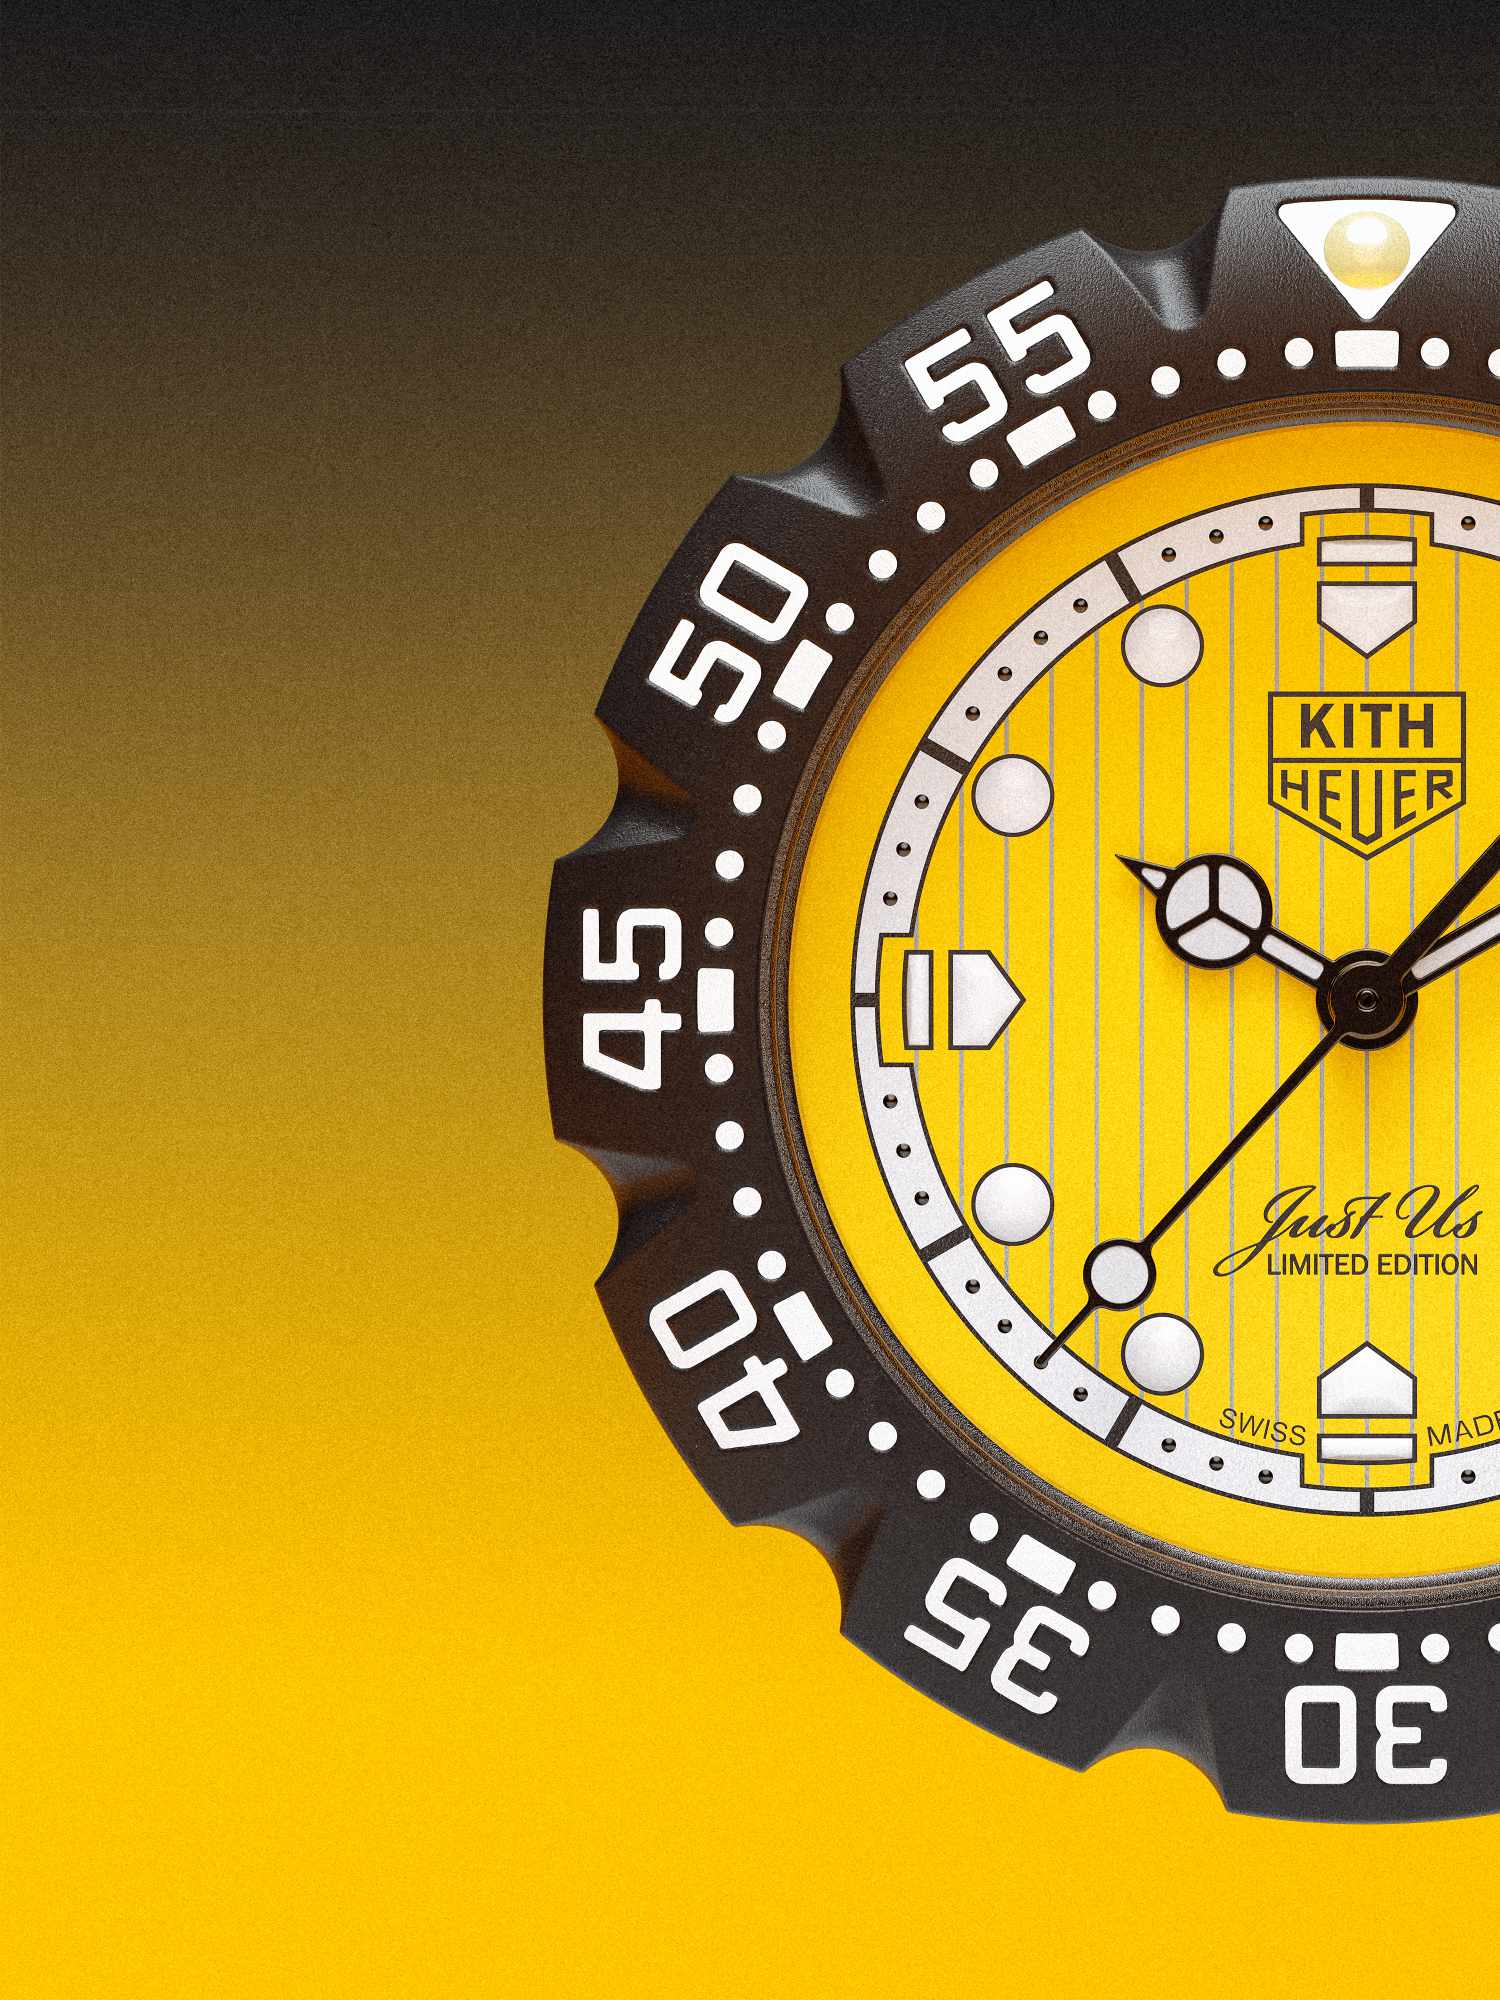 KITH & TAG Heuer's Formula 1 watch collab in black, yellow, silver colorways